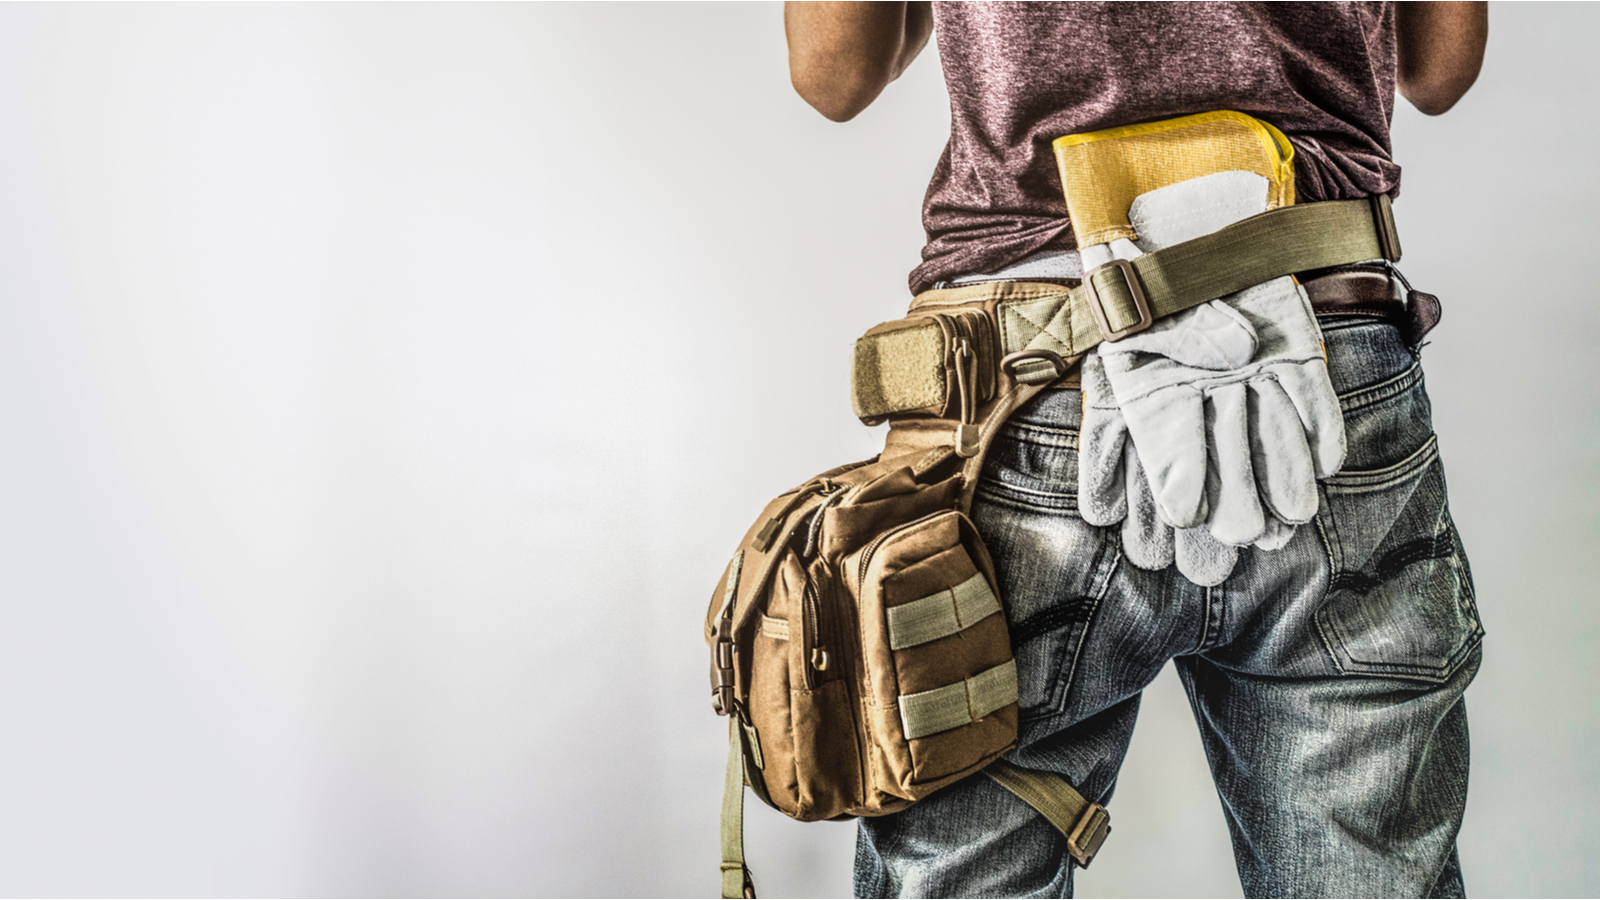 A man wearing dirty clothes with a tool belt around his waist representing tblt stock.